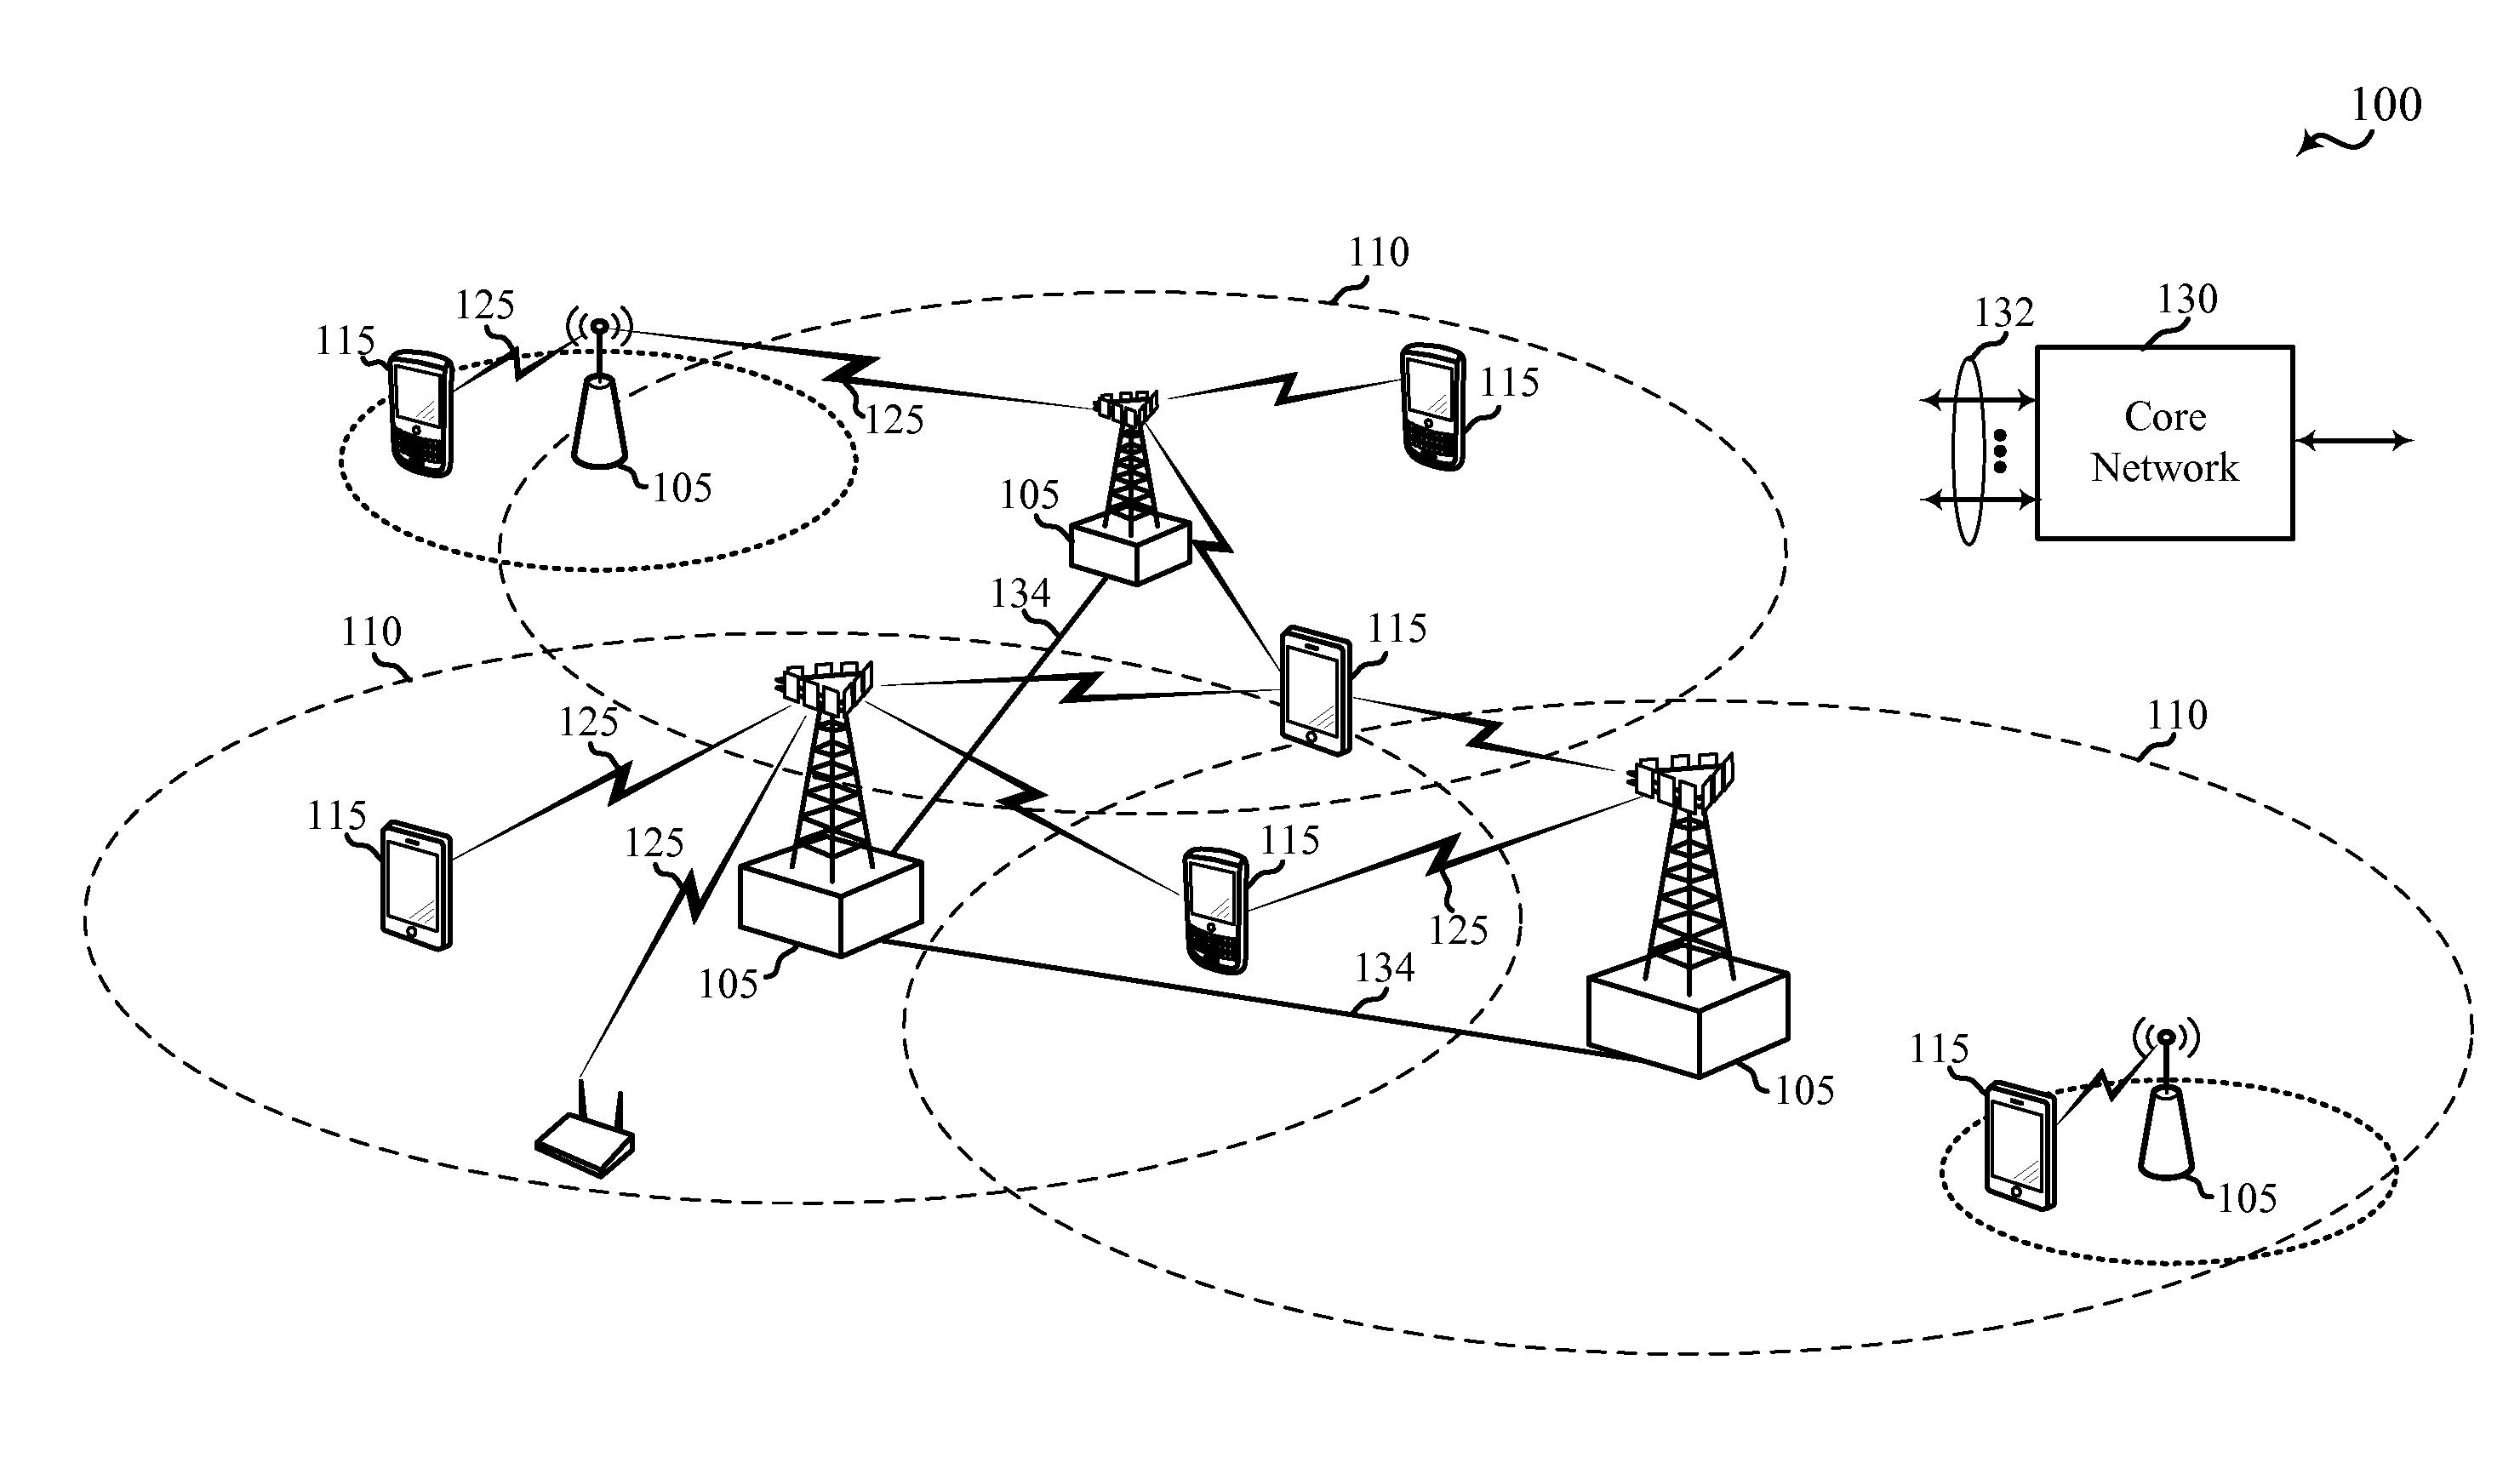 Techniques for prioritizing the reporting of uplink control information for cells utilizing contention based radio frequency spectrum